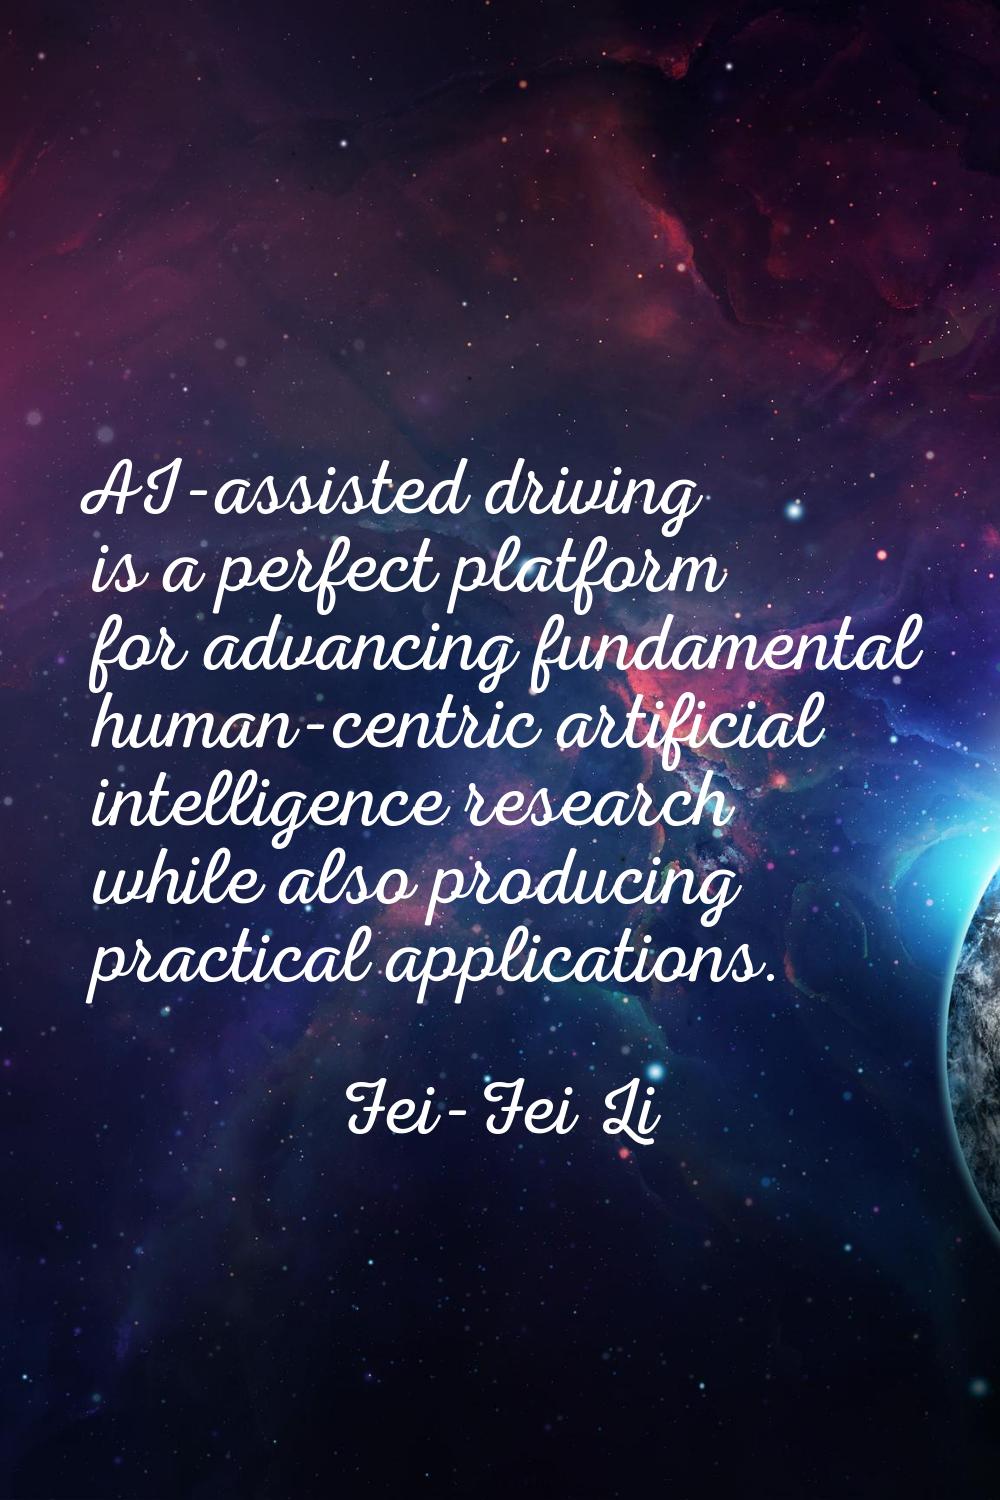 AI-assisted driving is a perfect platform for advancing fundamental human-centric artificial intell